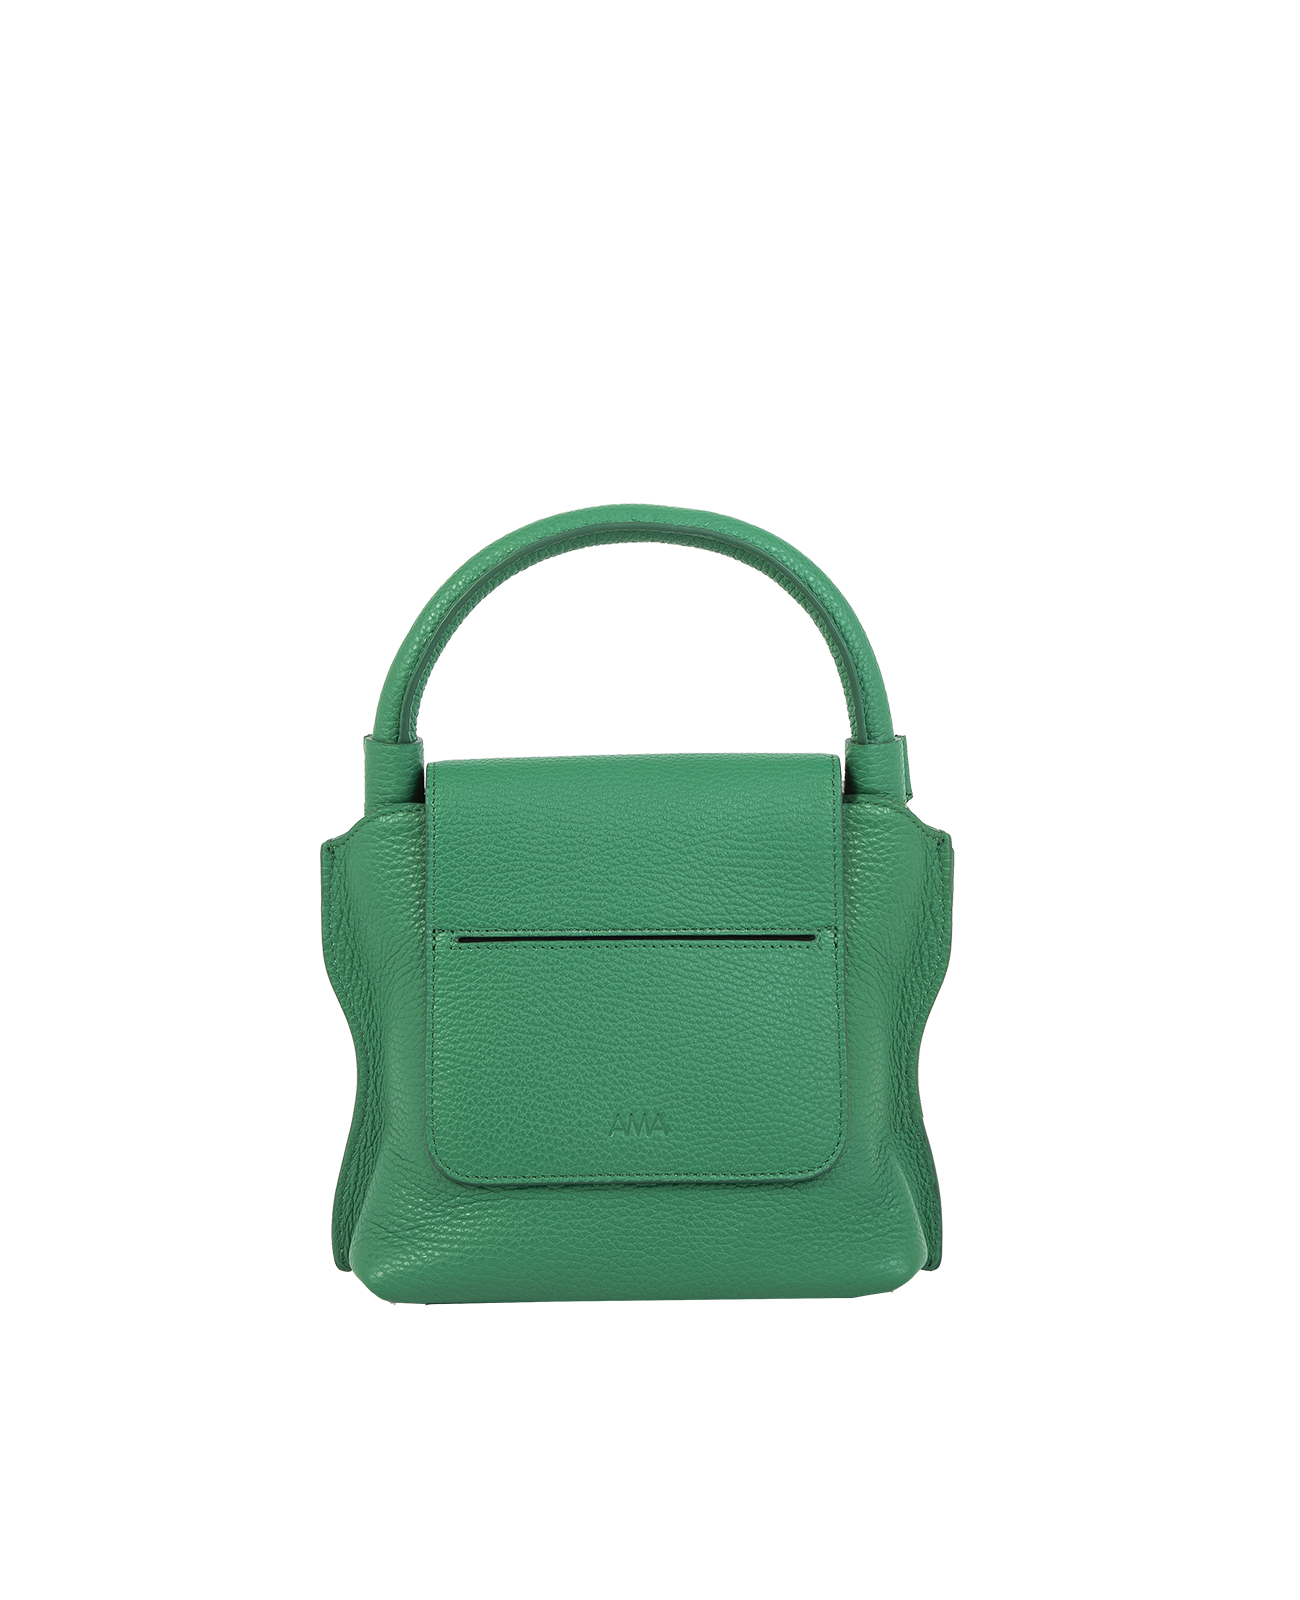 Cross-body bag in Italian full-grain leather, semi-aniline calf Italian leather with detachable shoulder strap.Three compartments, zip pocket in the back compartment. Magnetic flap closure with logo. Color: Green. Size:Medium